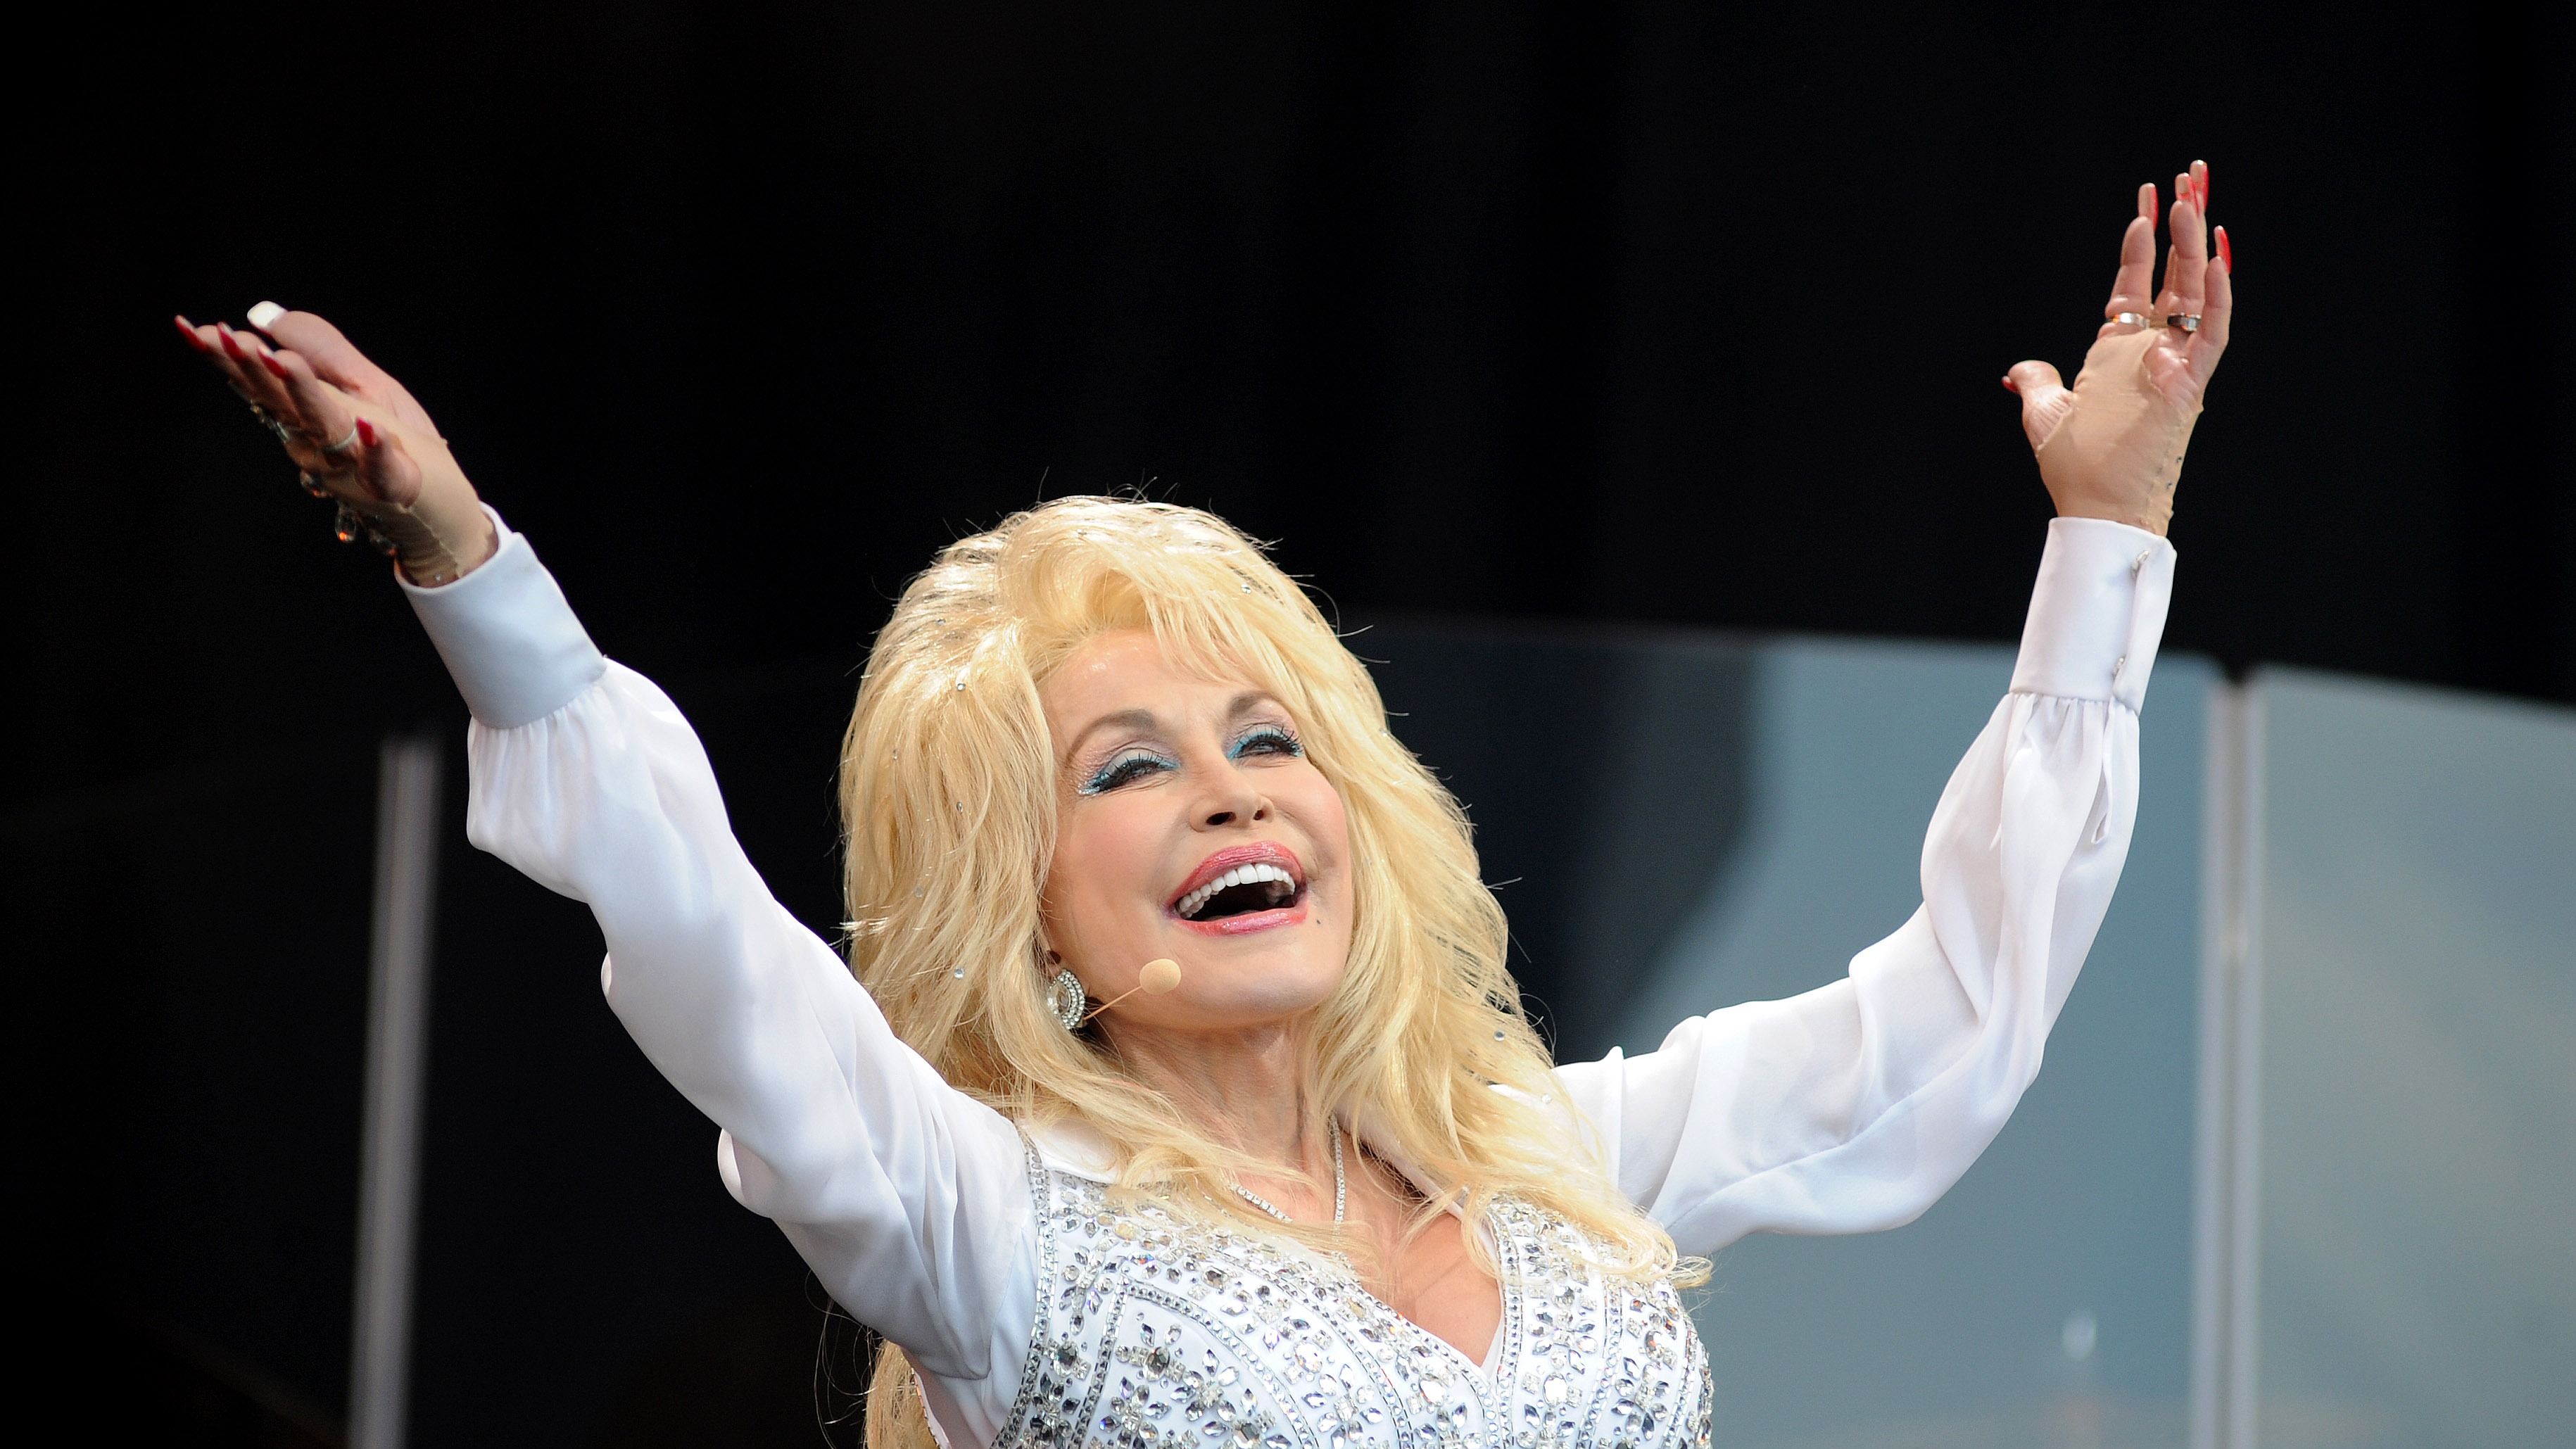 Dolly Parton Says Her Iconic Look Was Inspired by a “Town Tramp”